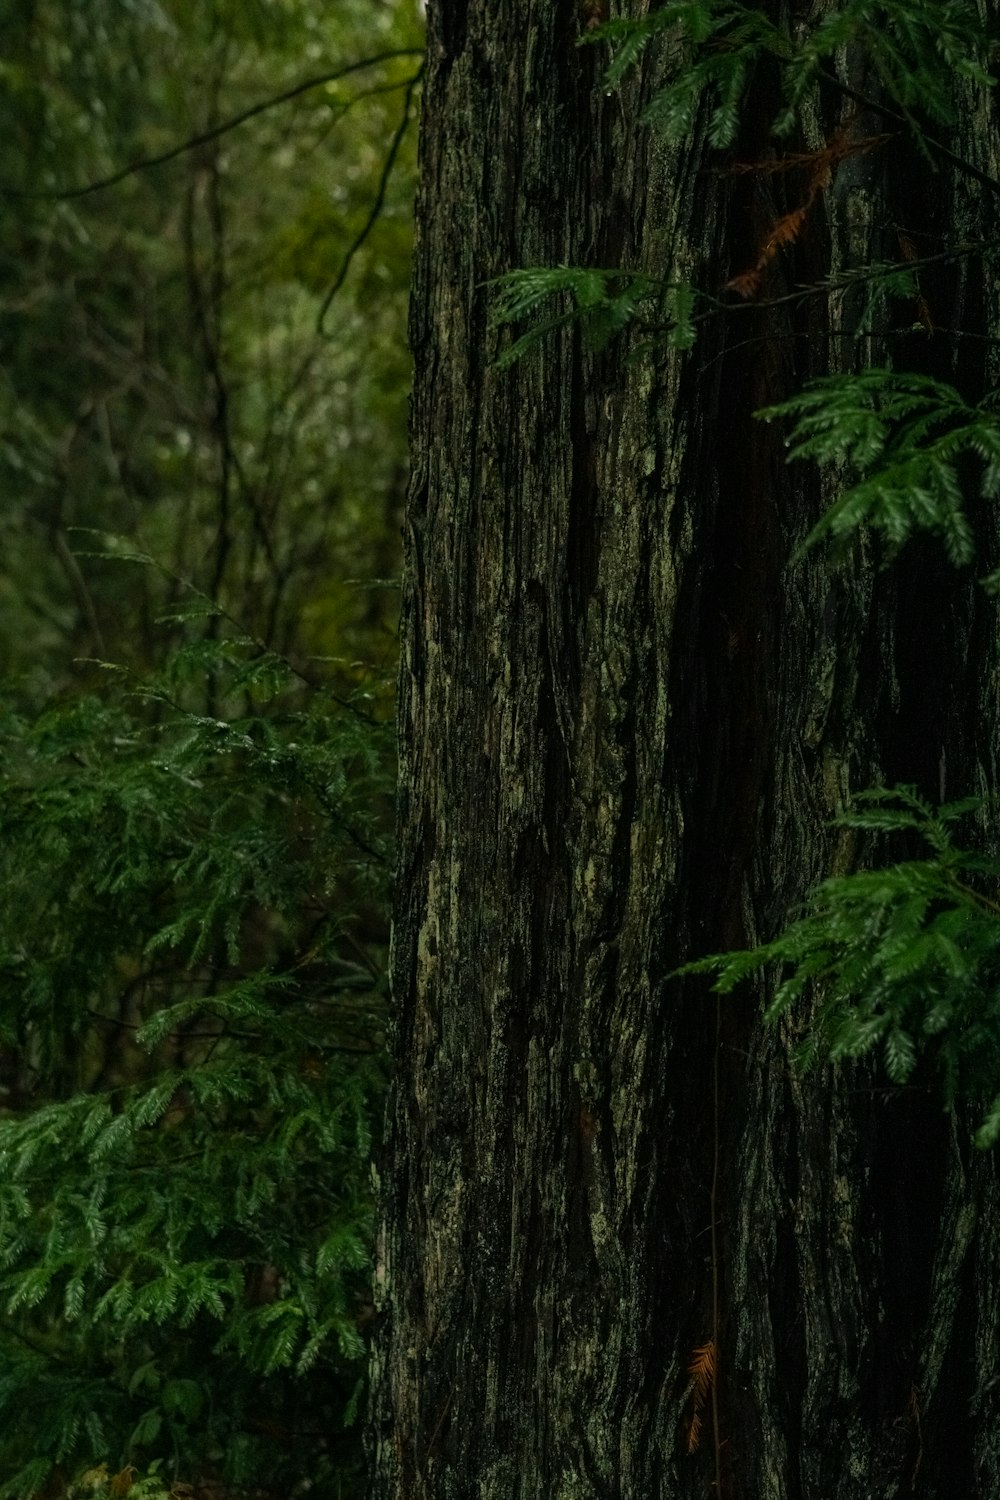 a black bear standing next to a tree in a forest